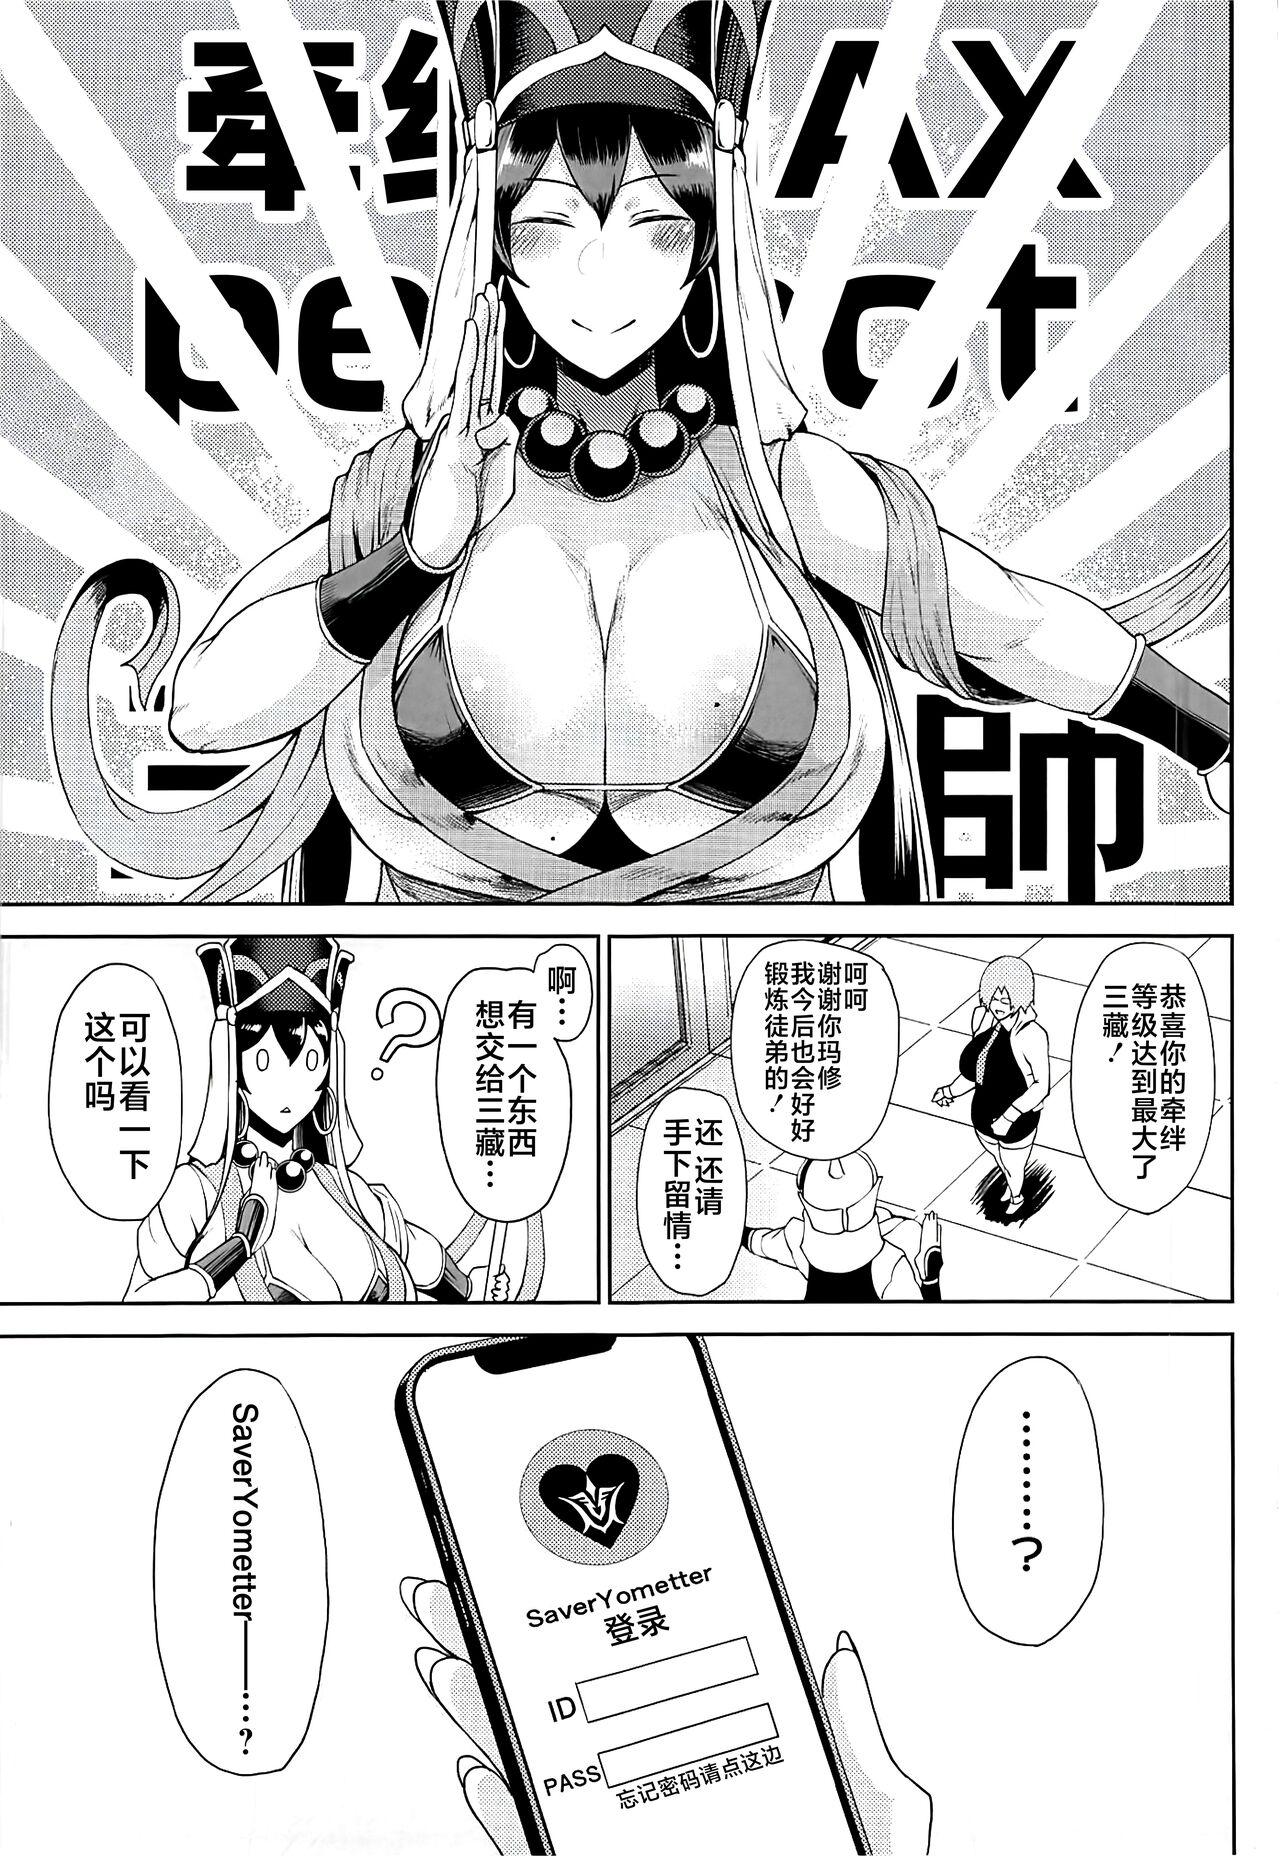 Fun Shugyou Now - Fate grand order Groupsex - Page 2